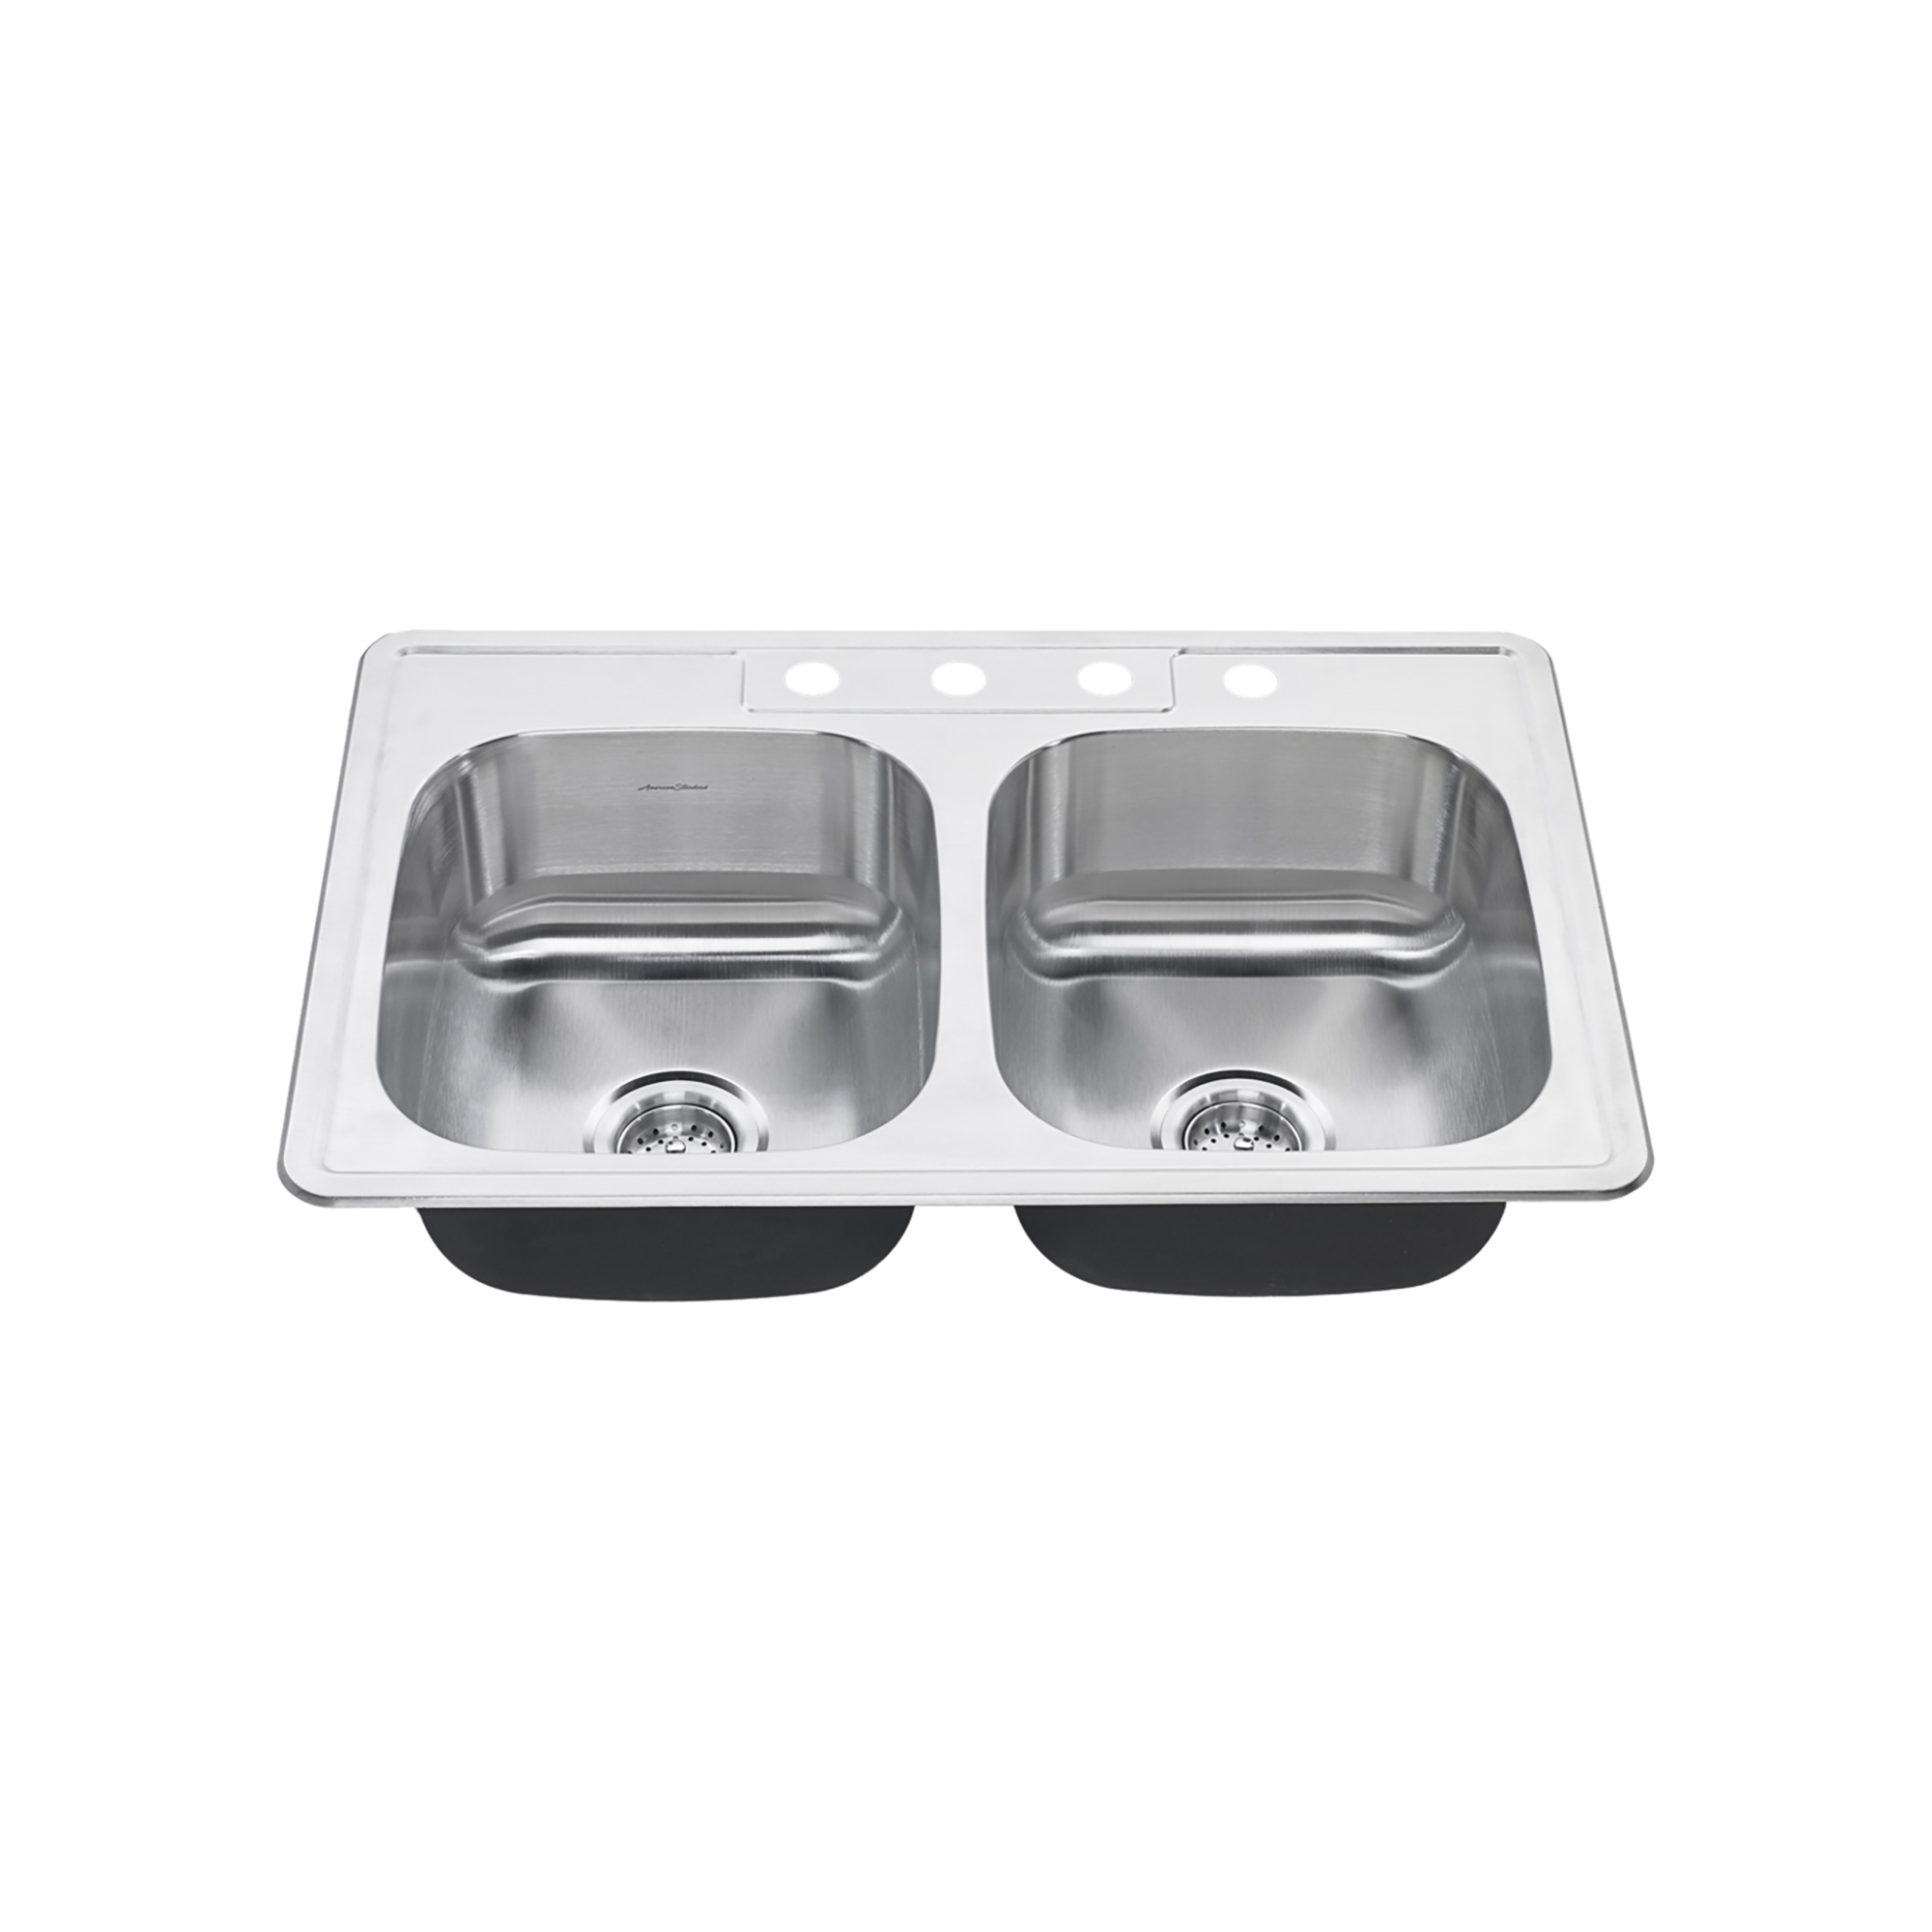 Colony™ 33 x 22-Inch Stainless Steel 4-Hole Top Mount Double-Bowl ADA Kitchen Sink